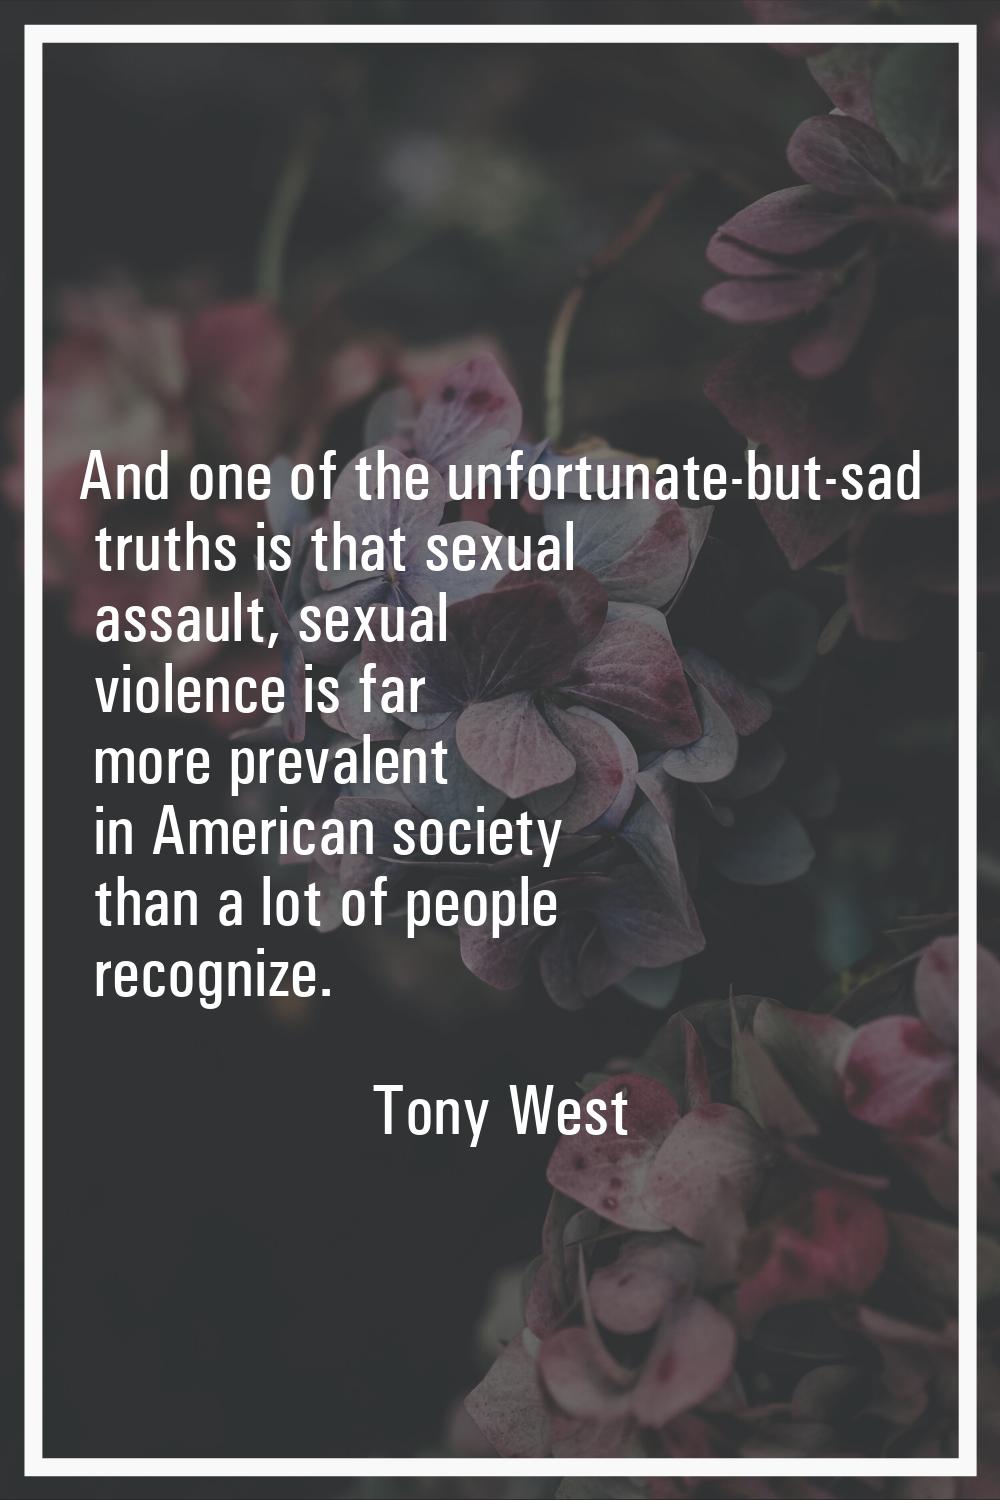 And one of the unfortunate-but-sad truths is that sexual assault, sexual violence is far more preva